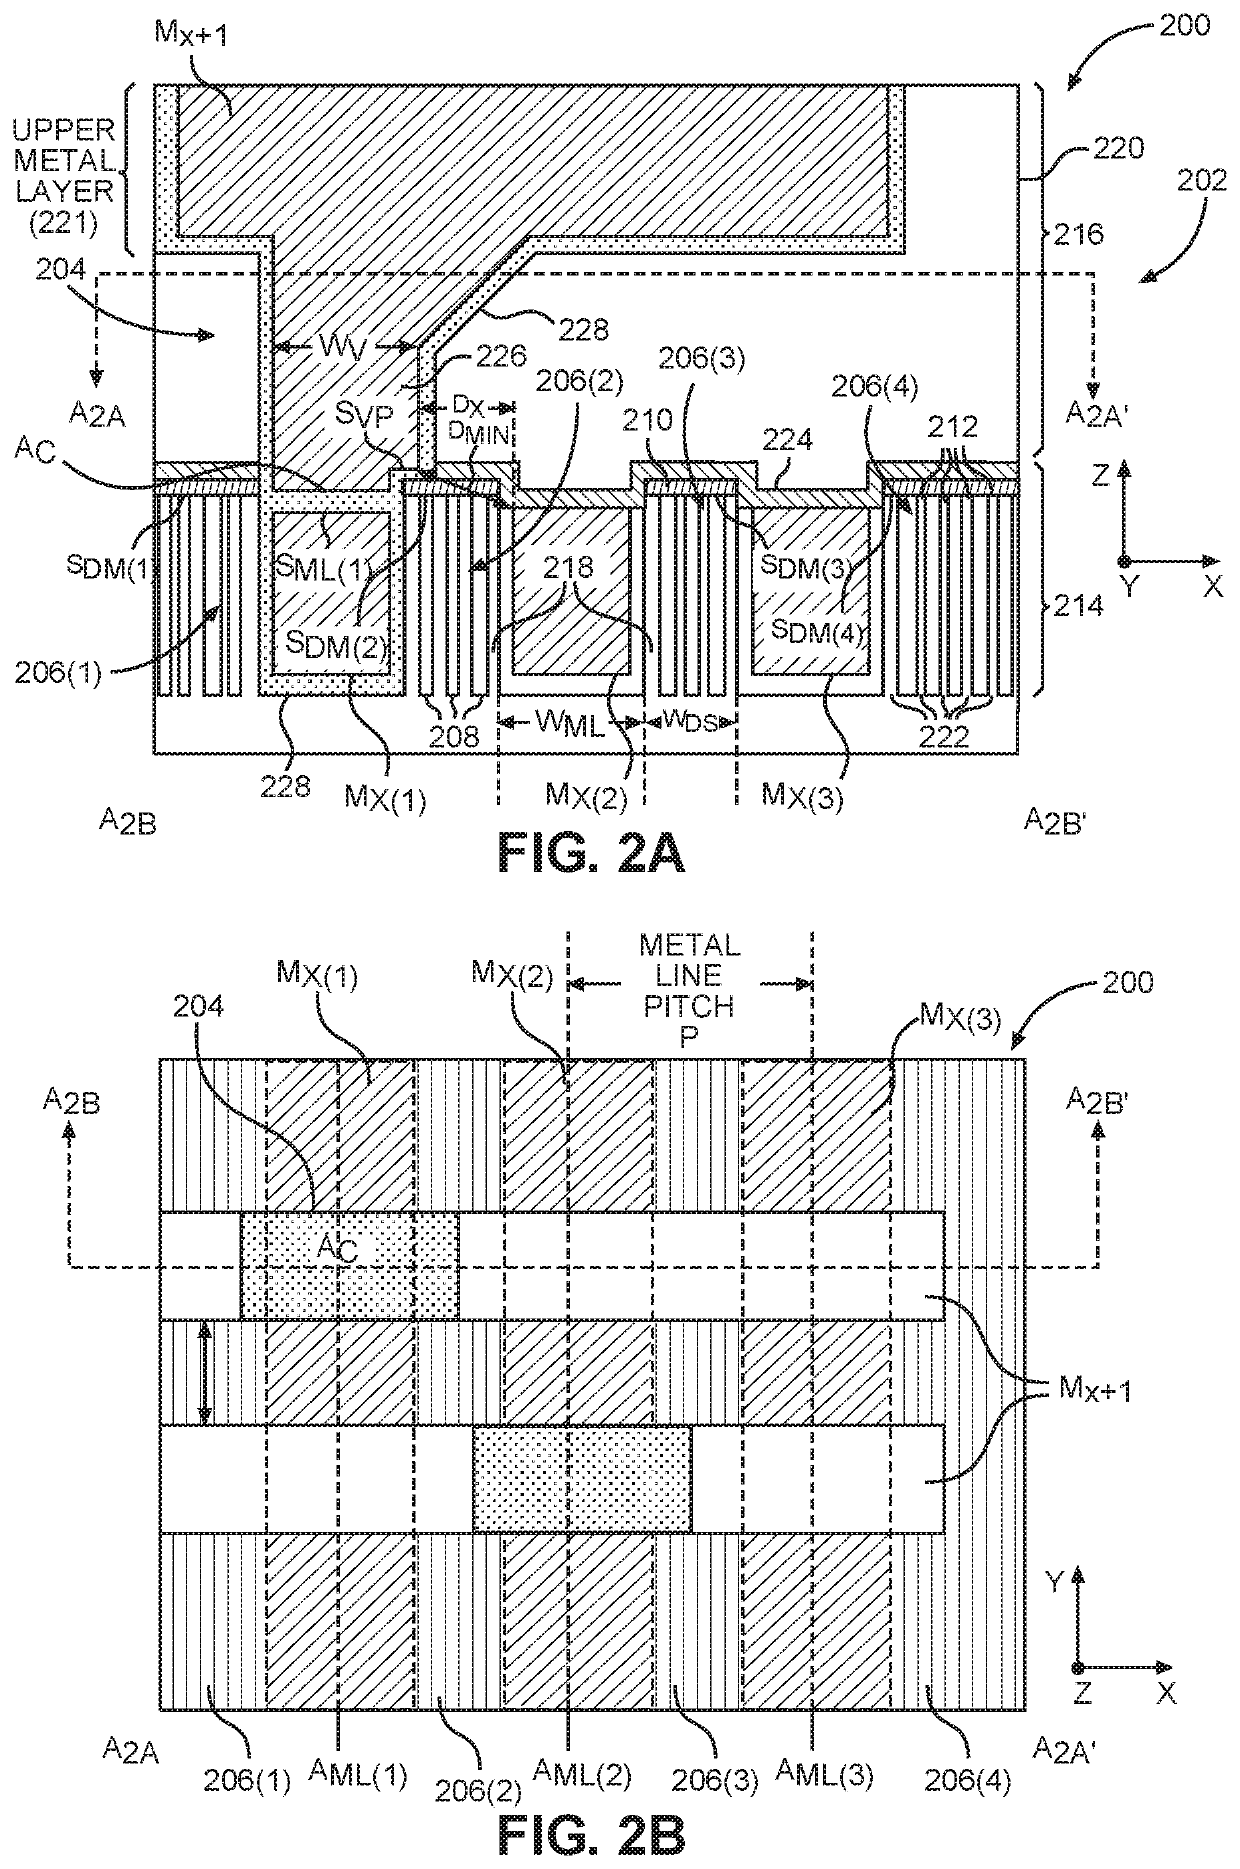 Integrated circuit (IC) interconnect structure having a metal layer with asymmetric metal line-dielectric structures supporting self-aligned vertical interconnect accesses (VIAS)